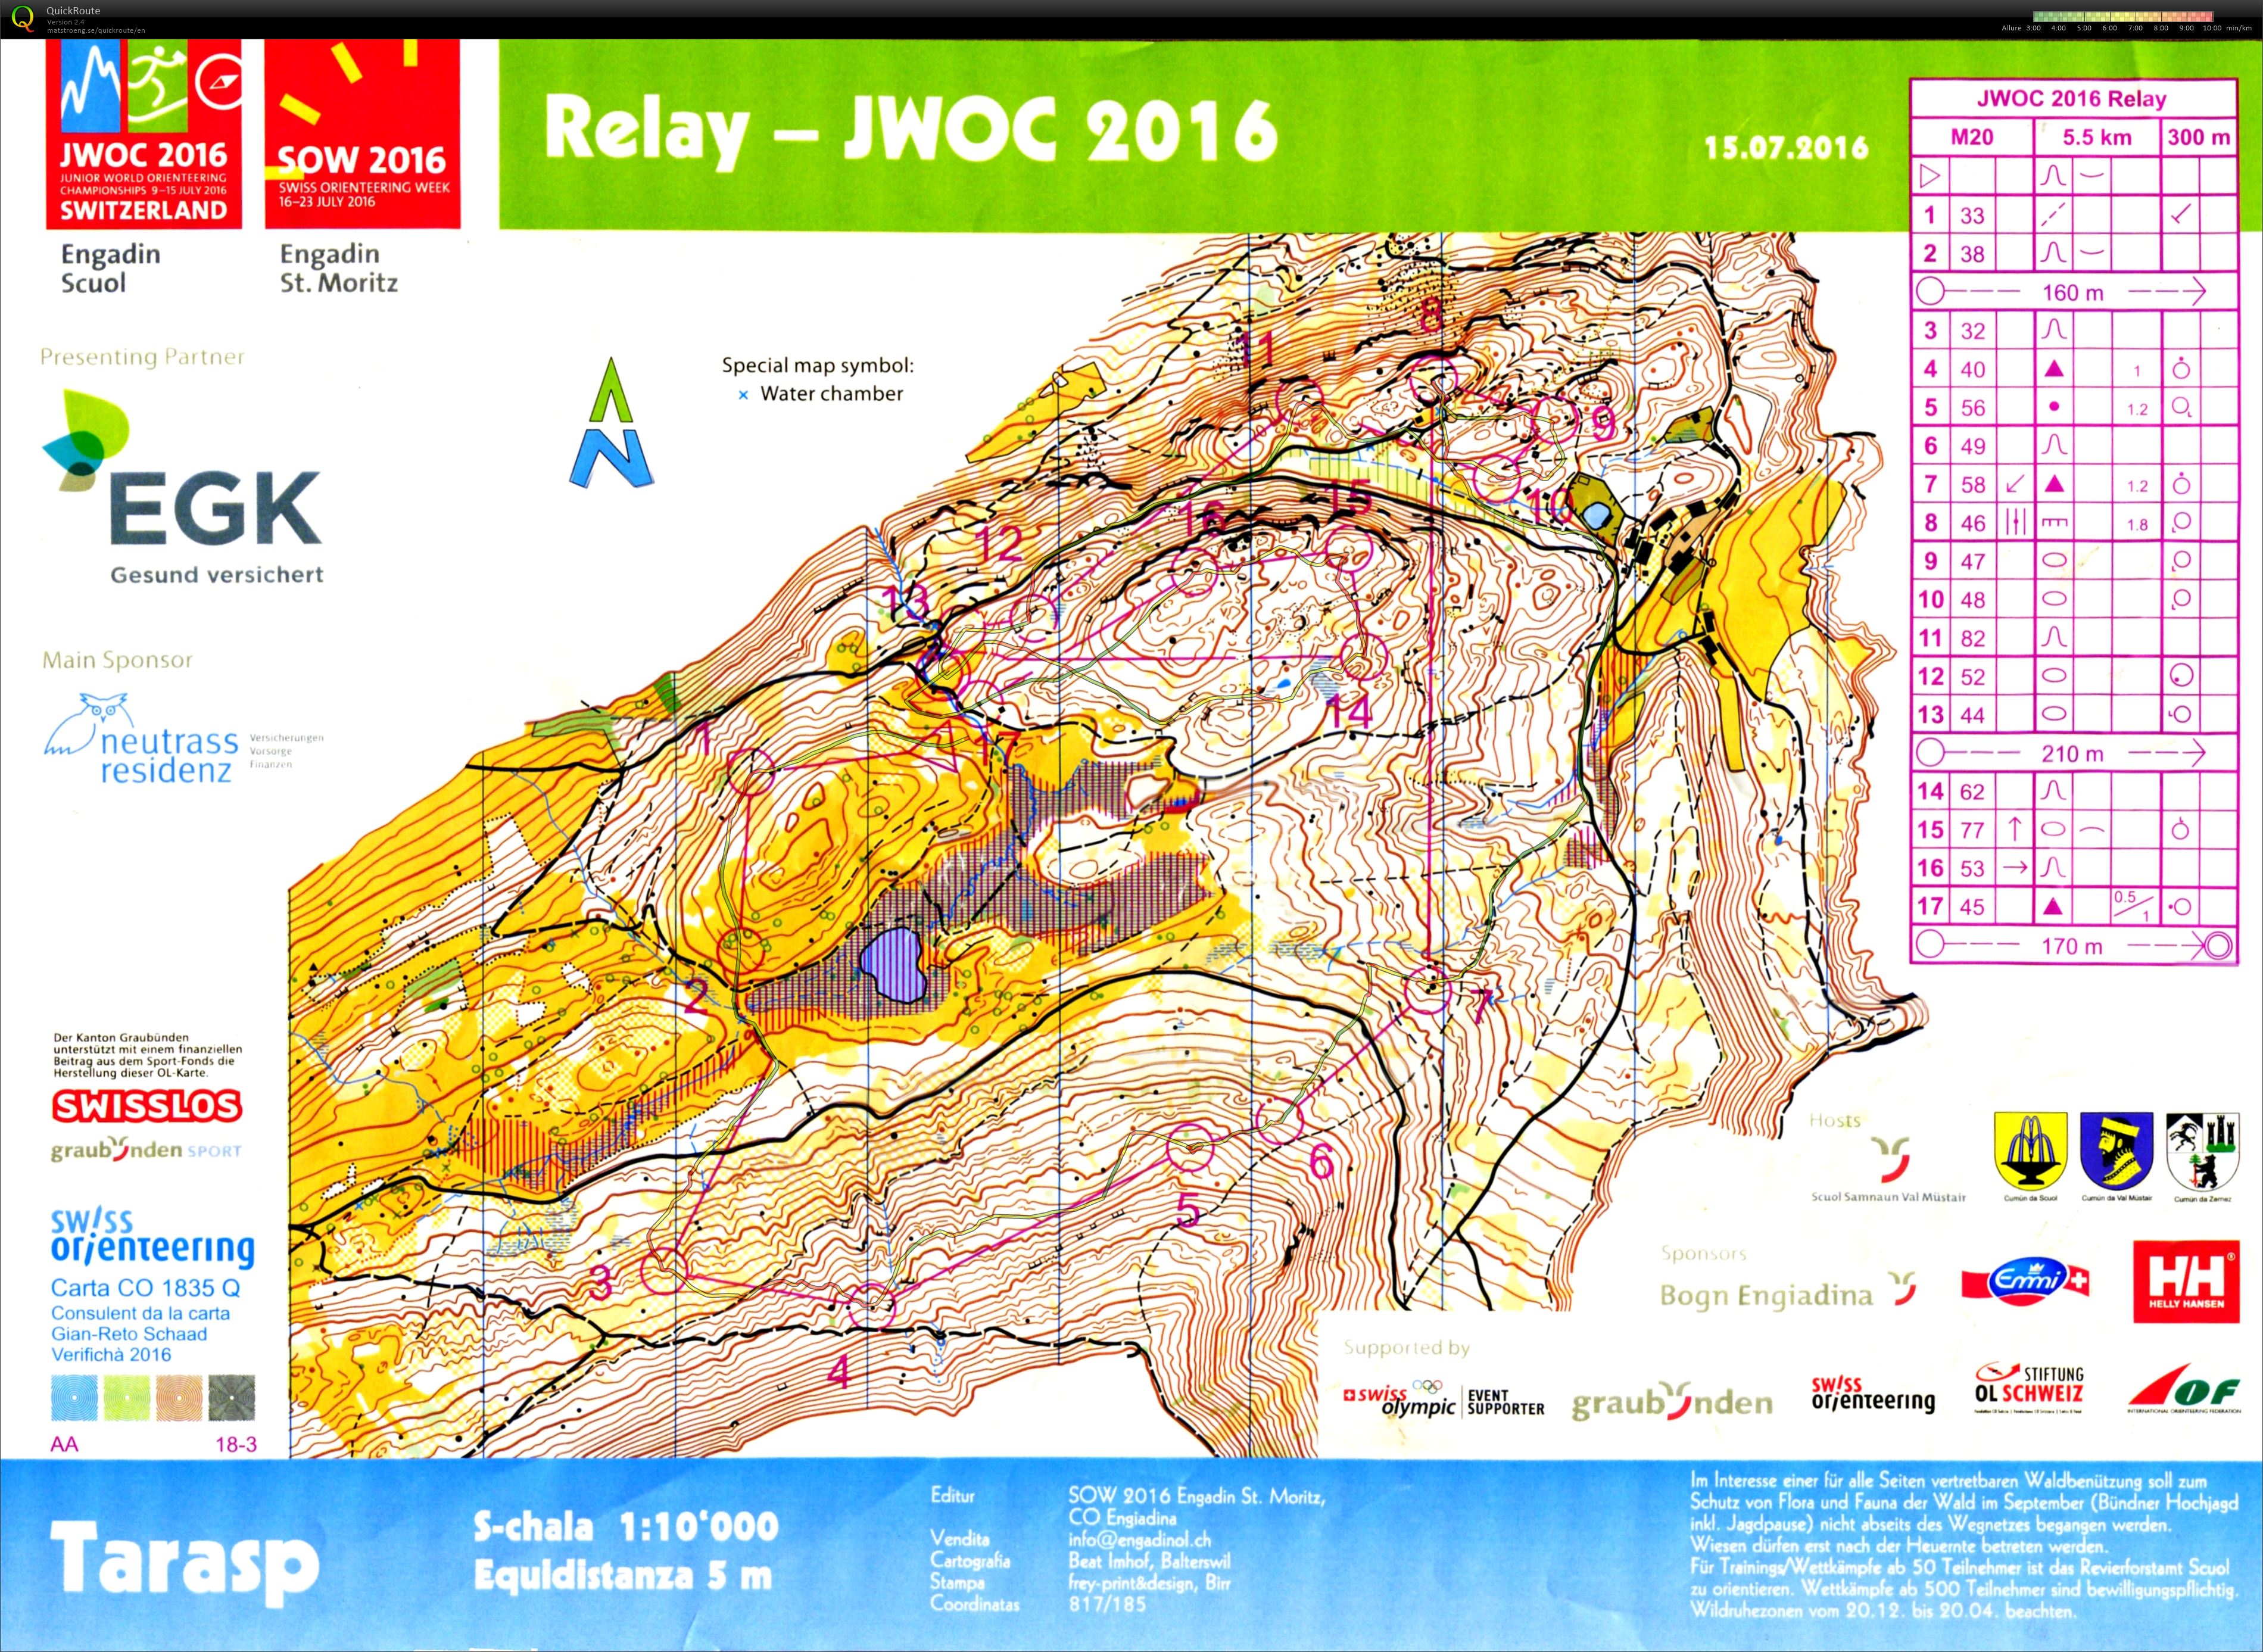 JWOC Relay for training (15.07.2016)